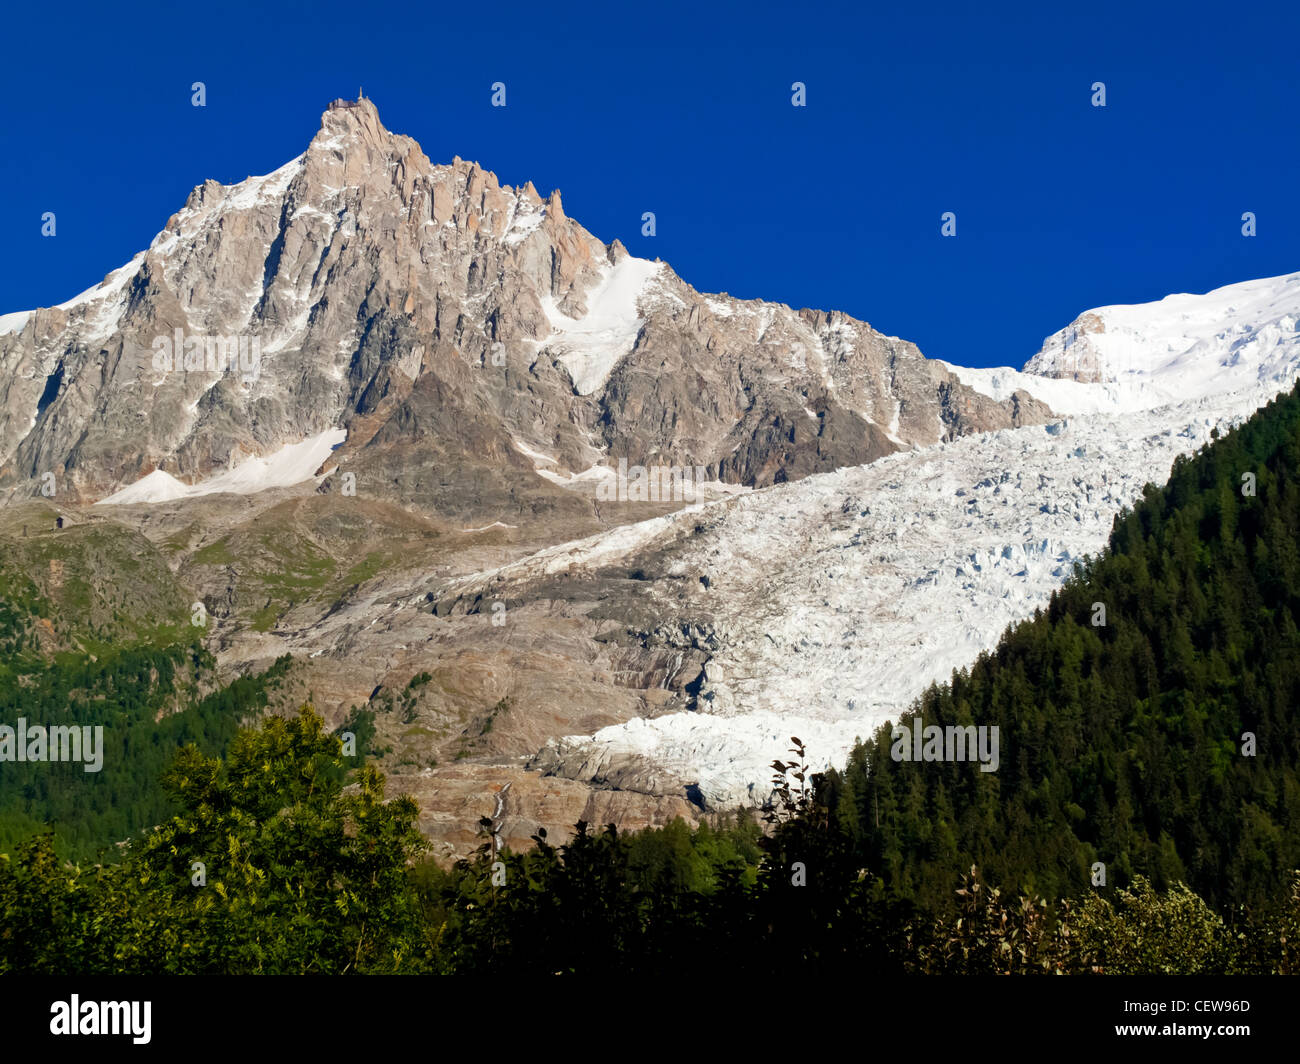 The summit of Aiguille du Midi adjacent to Mont Blanc viewed from Bossons near Chamonix in the Savoie region of the French Alps Stock Photo